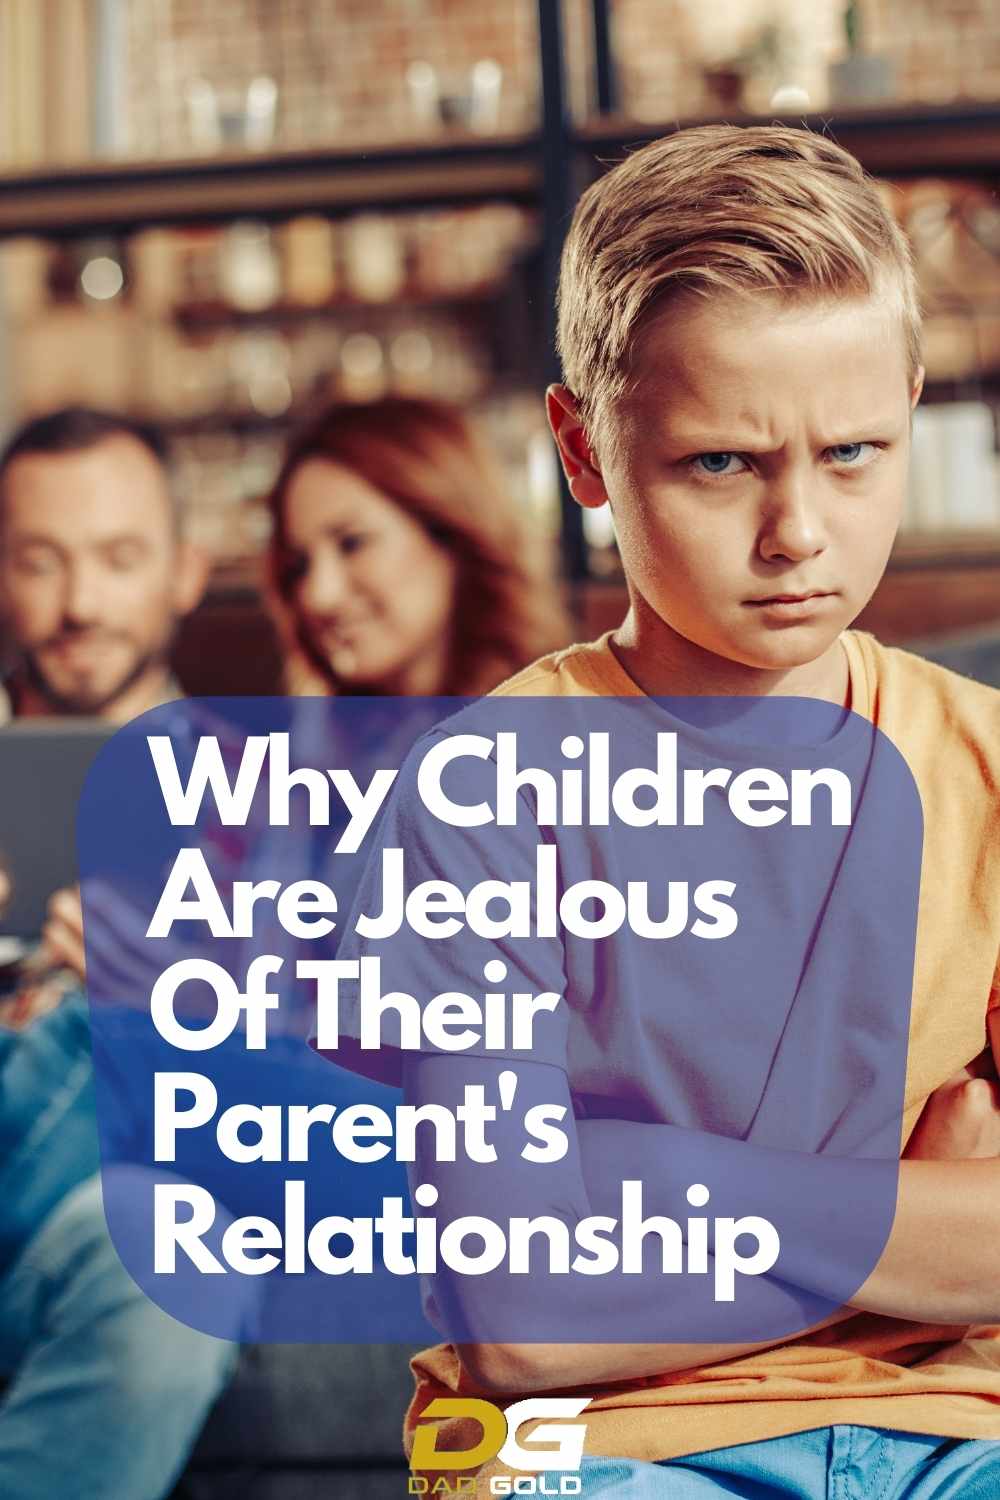 Why Children Are Jealous Of Their Parent's Relationship